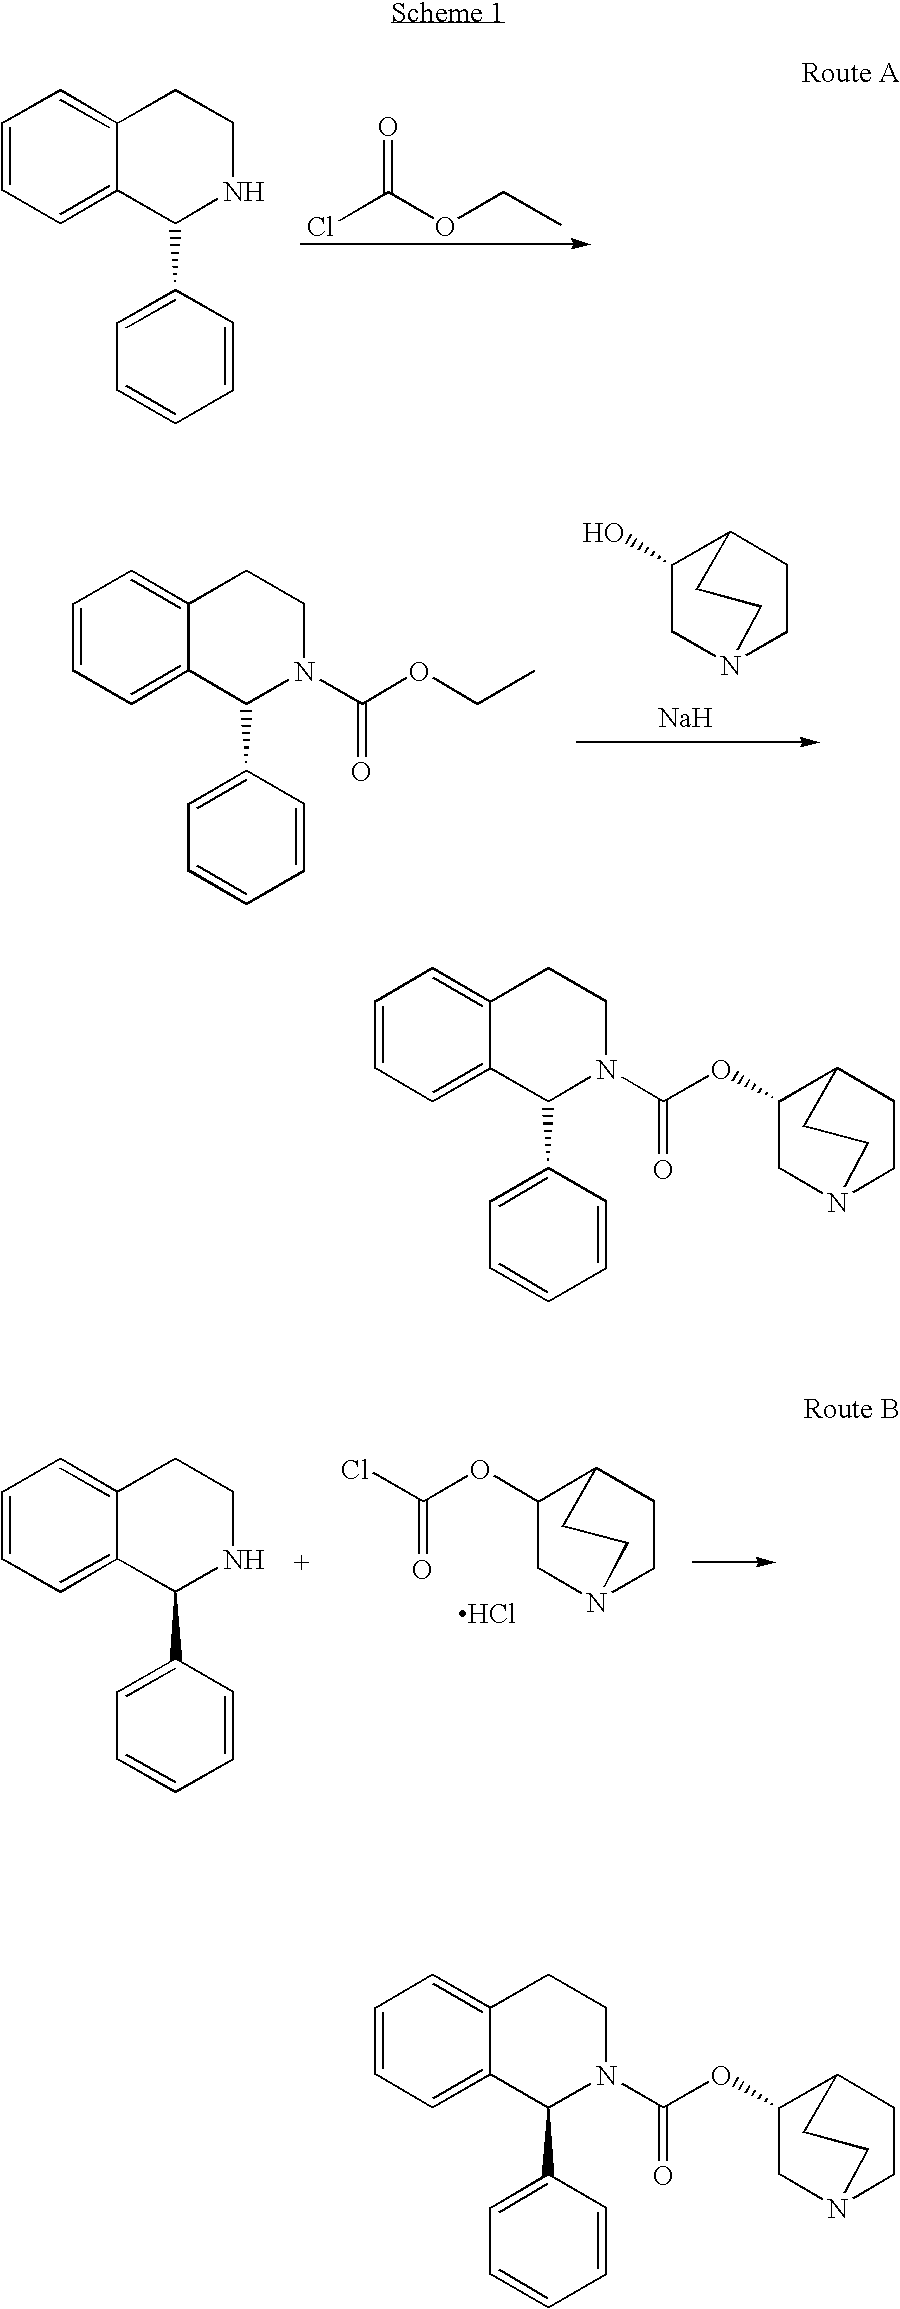 Process for the Synthesis of Solifenacin